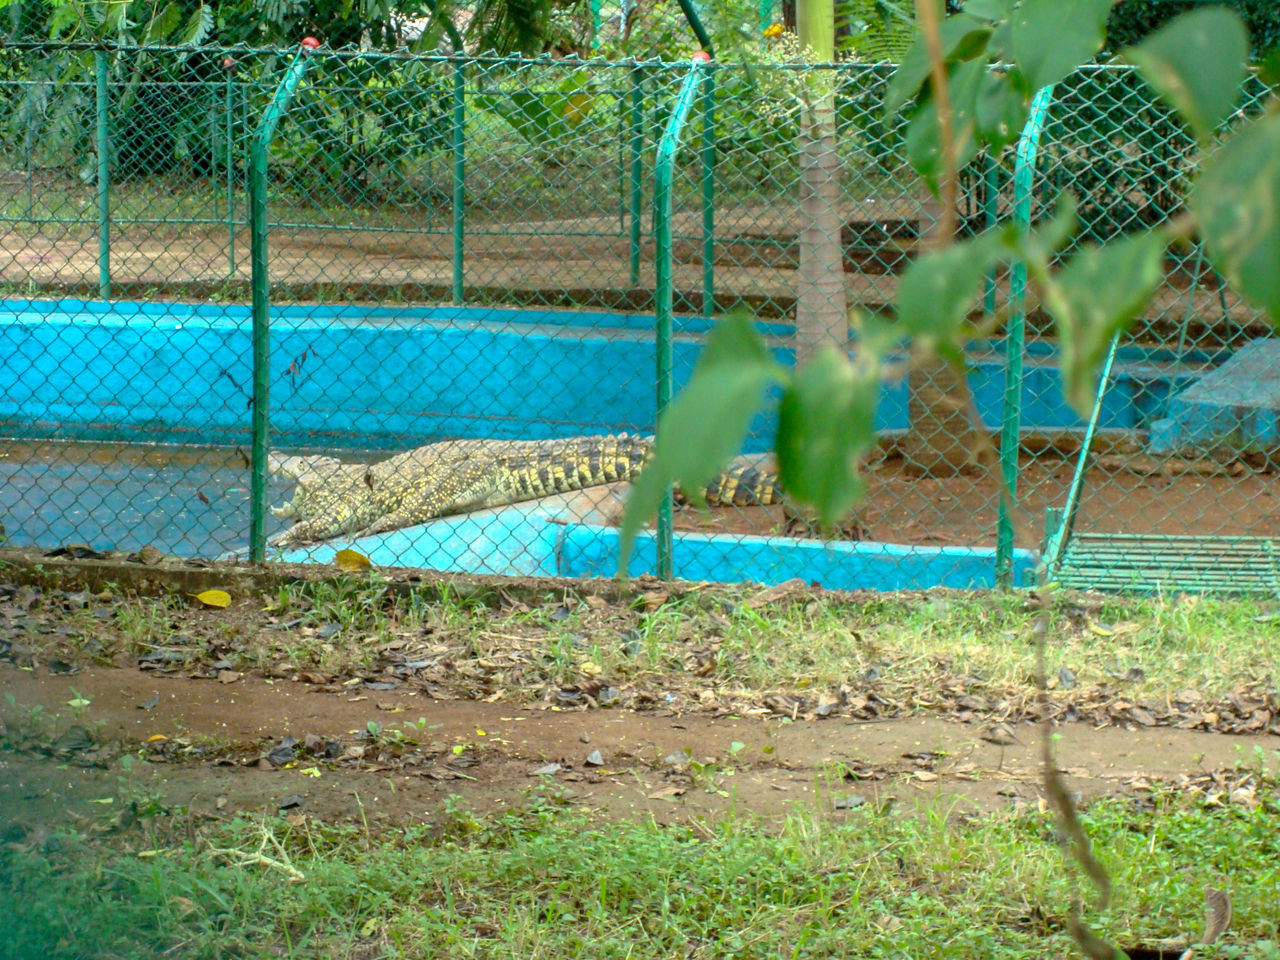 VIEW OF AN ANIMAL ON FENCE